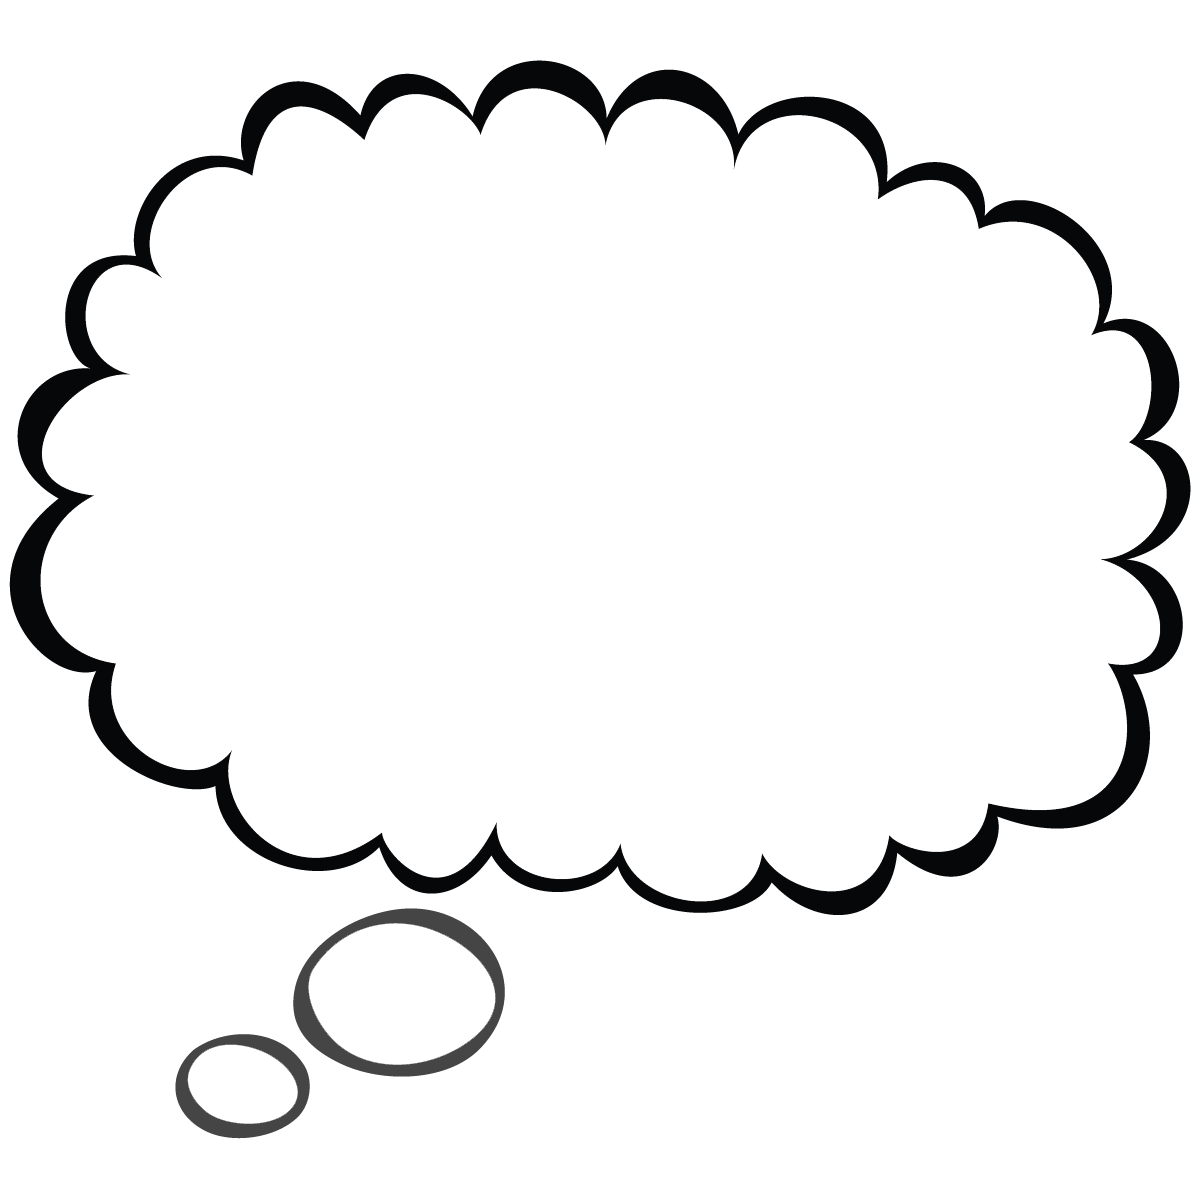 Speech balloon Thought Clip art - Thought Bubble Transparent png ...